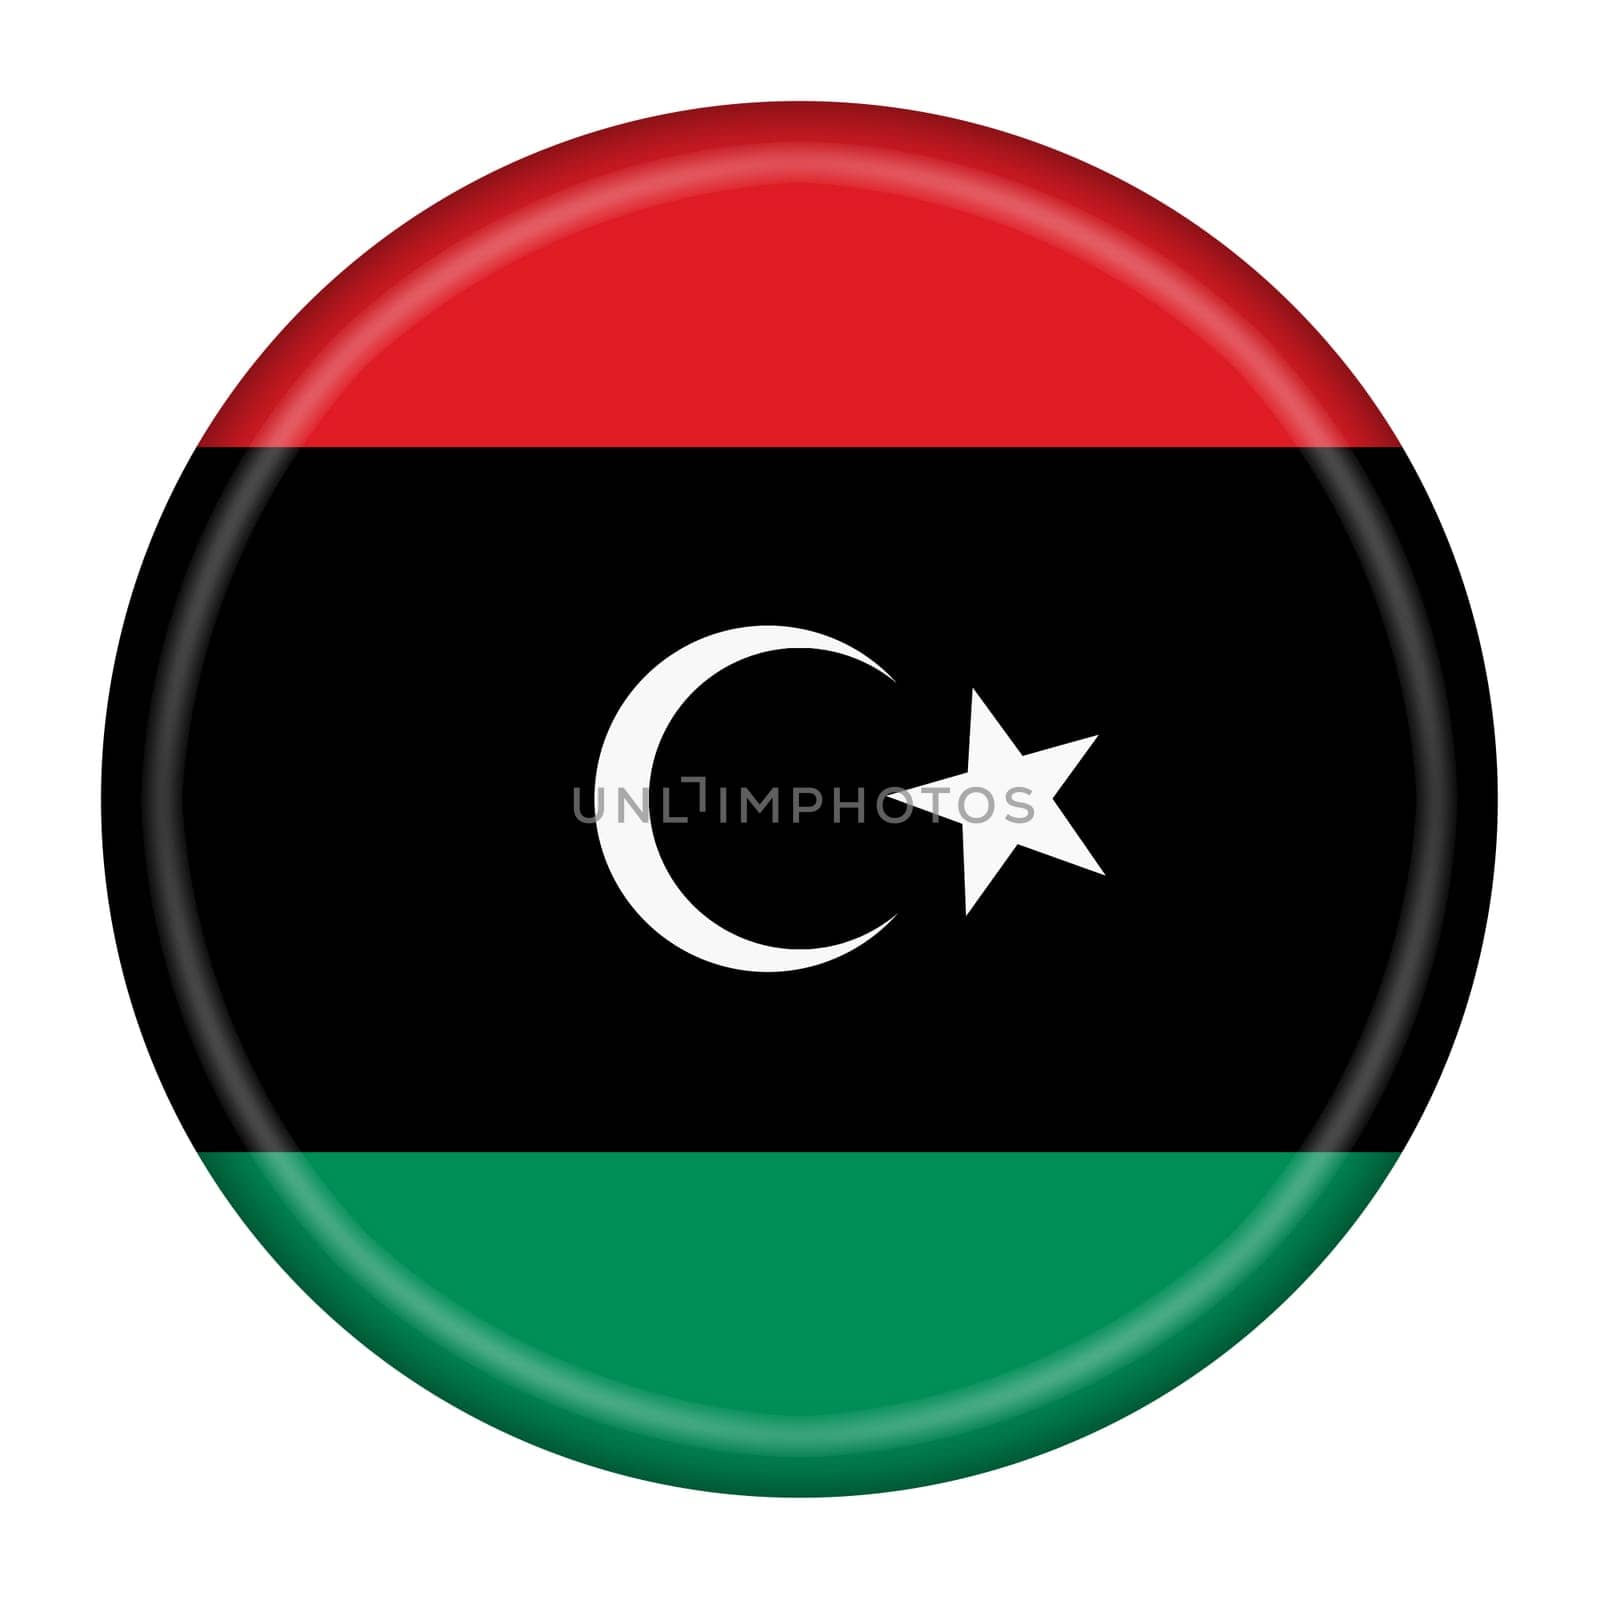 A Libya flag button 3d illustration with clipping path